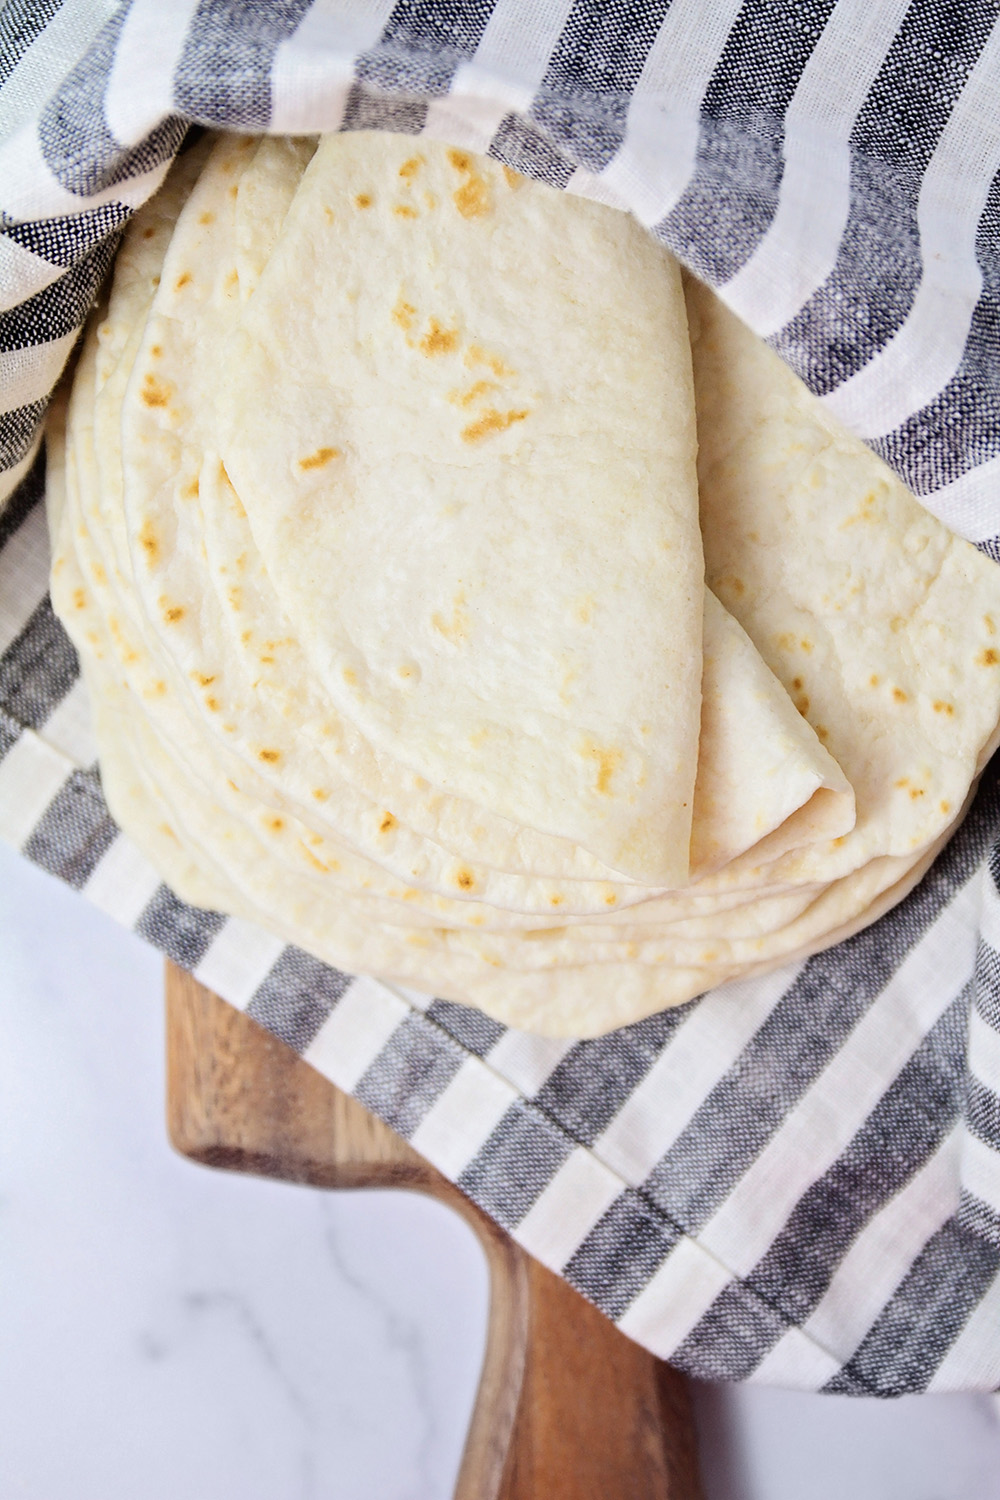 These soft homemade flour tortillas are perfect for tacos, enchiladas, burritos, and more! They're so delicious and so easy to make!